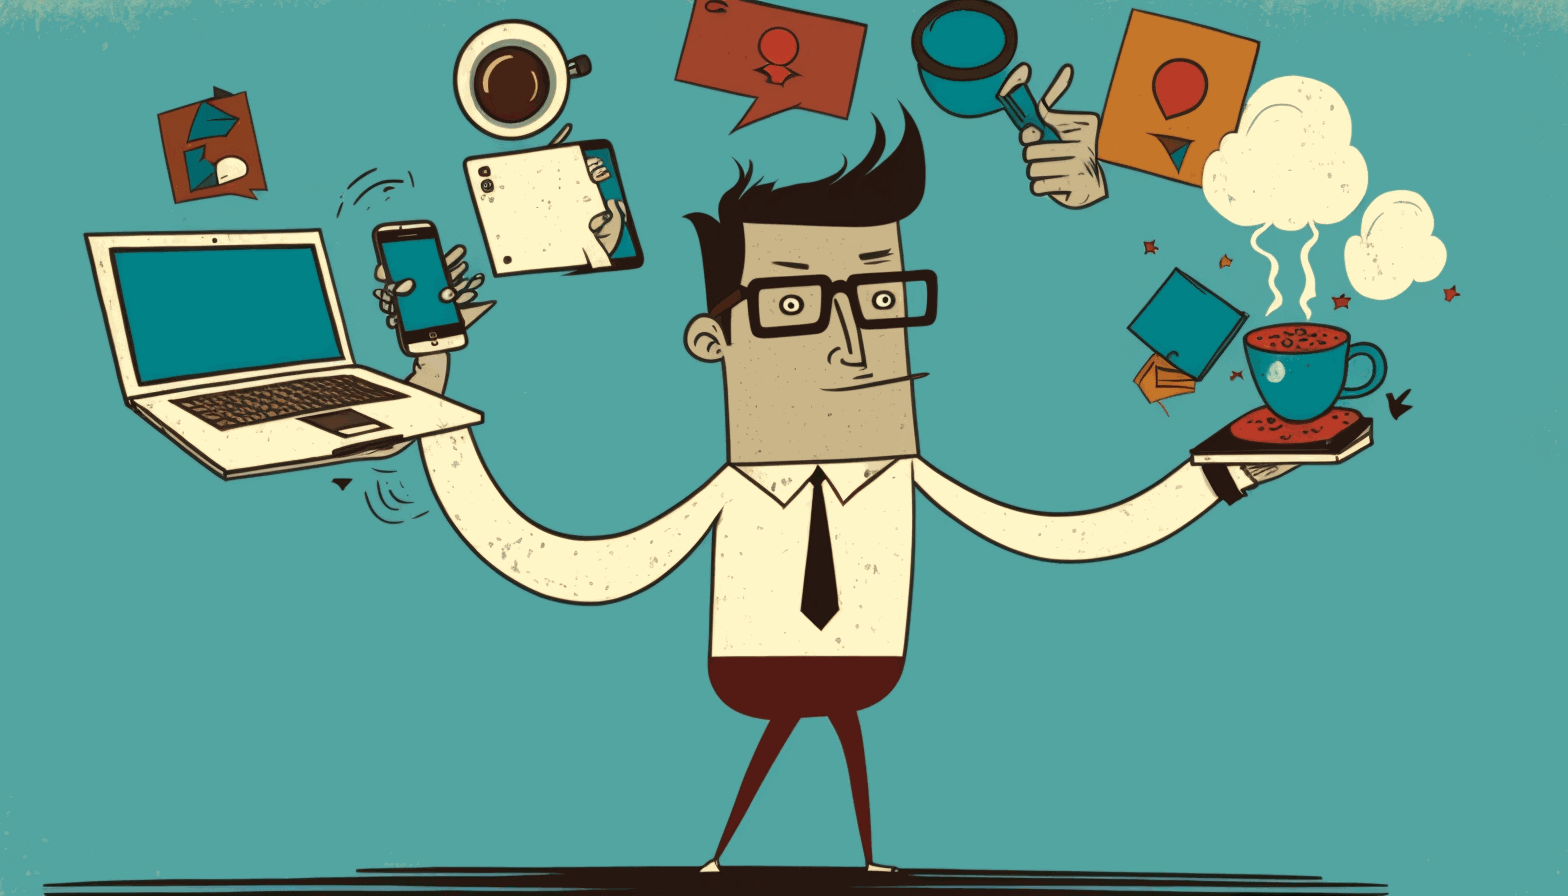 A cartoon image of a person juggling various personal devices (laptop, smartphone, tablet) and work-related items (documents, coffee cup)